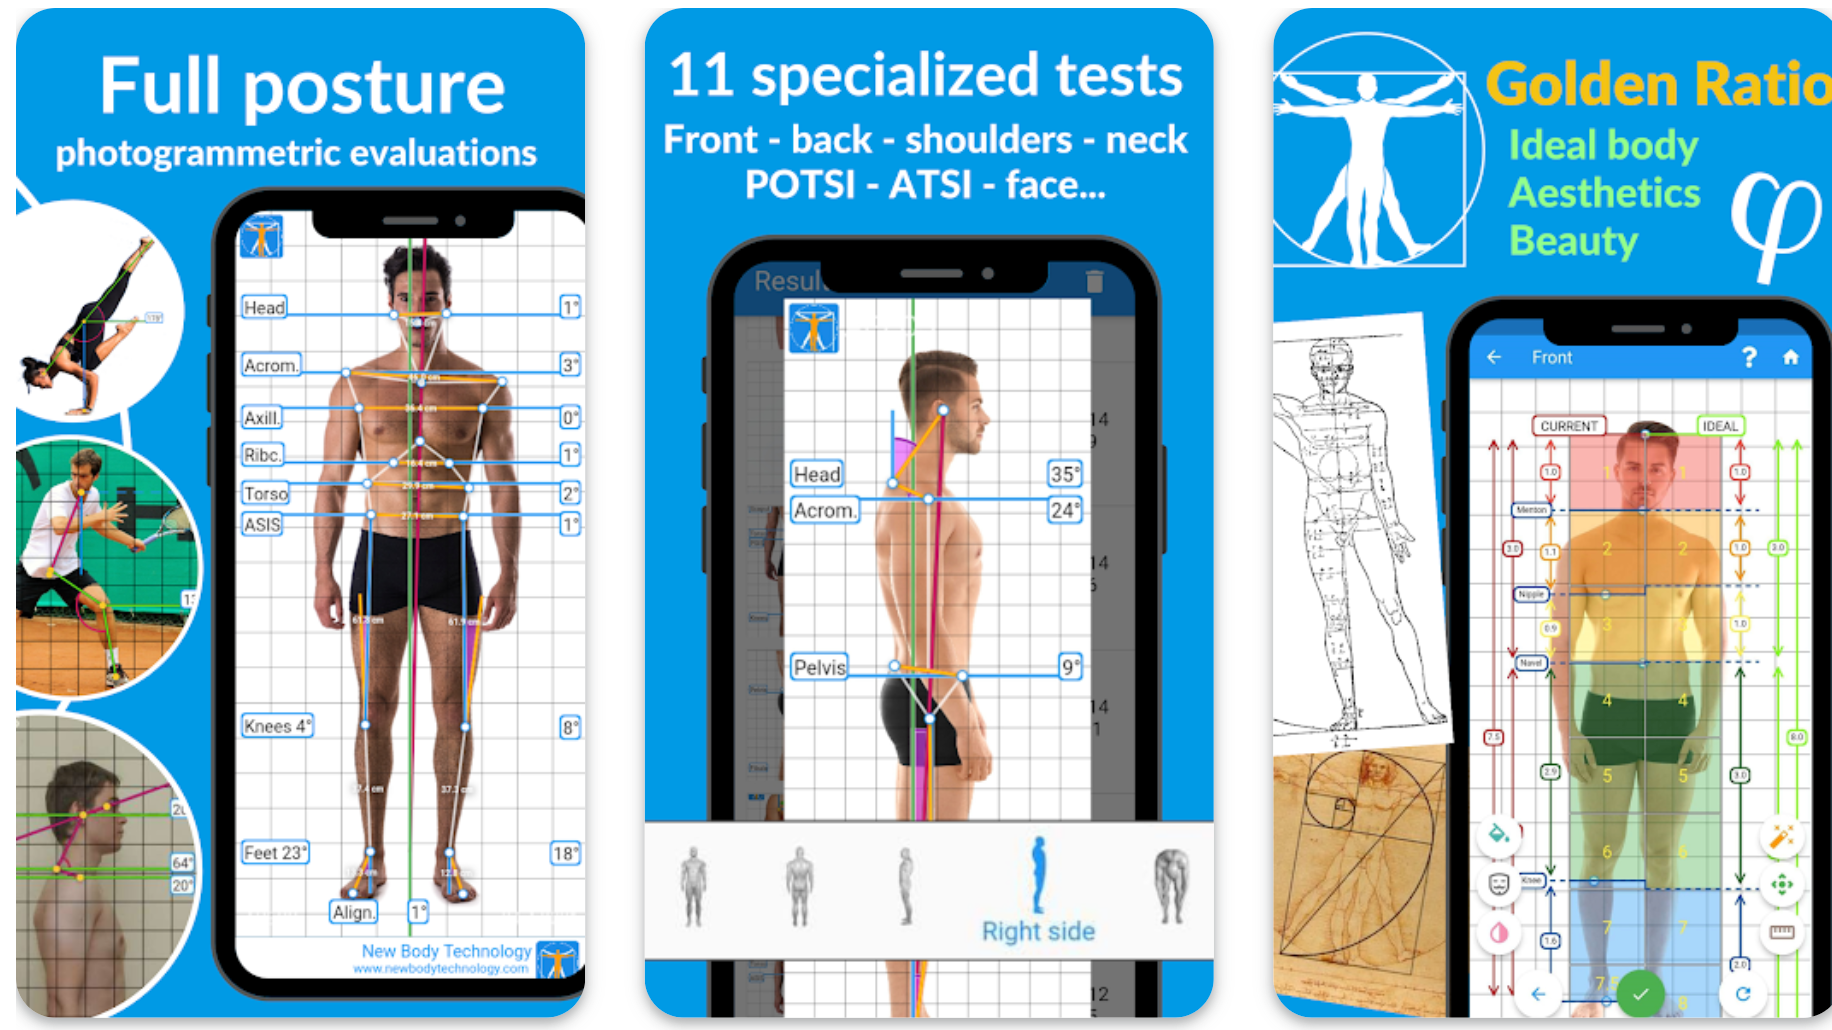 10+ Best Posture Apps to Analyze & Improve Your Posture – BackEmbrace